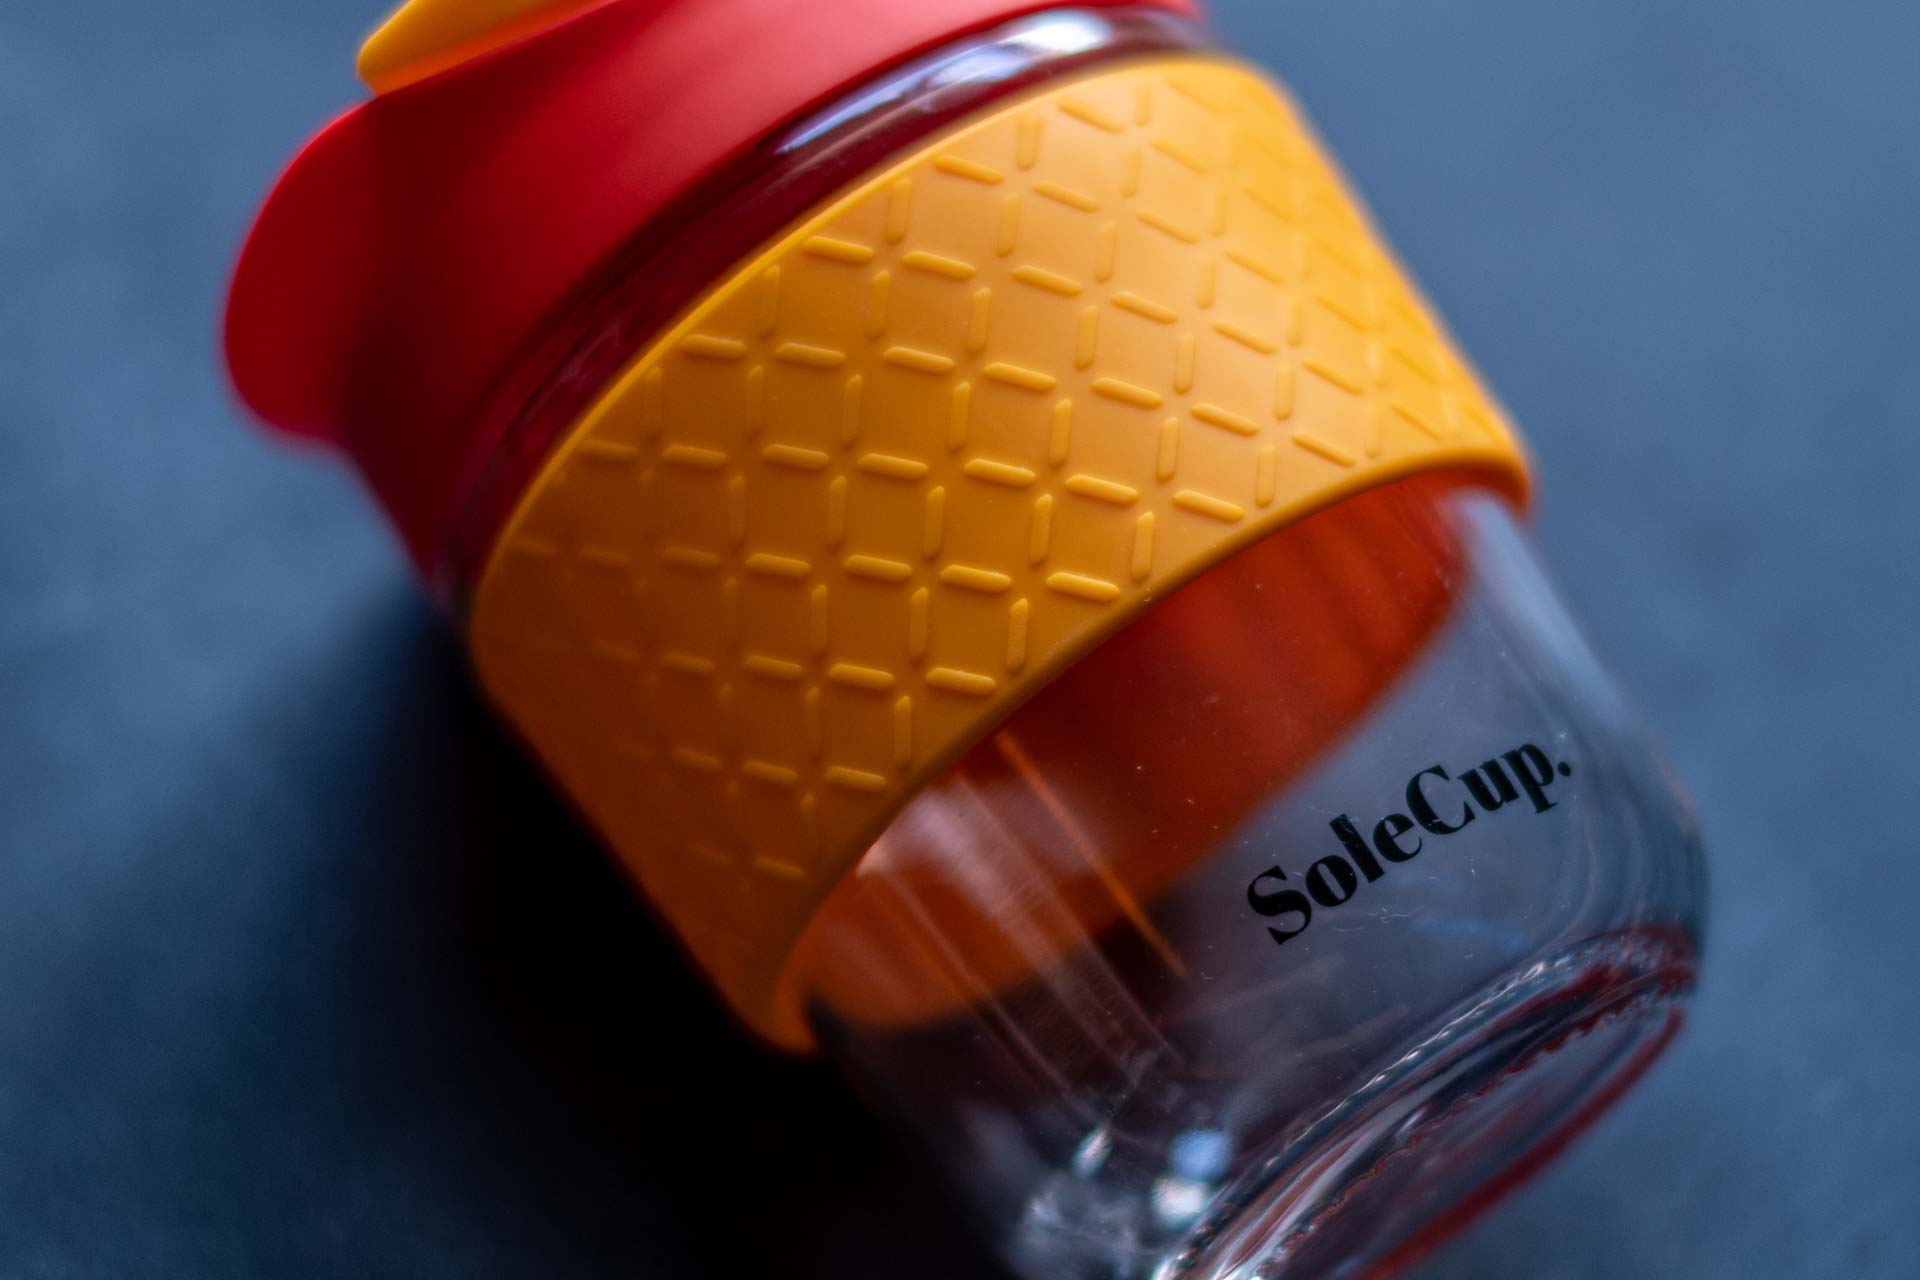 SoleCup - Home - Reusable Coffee and Loose Tea Cups